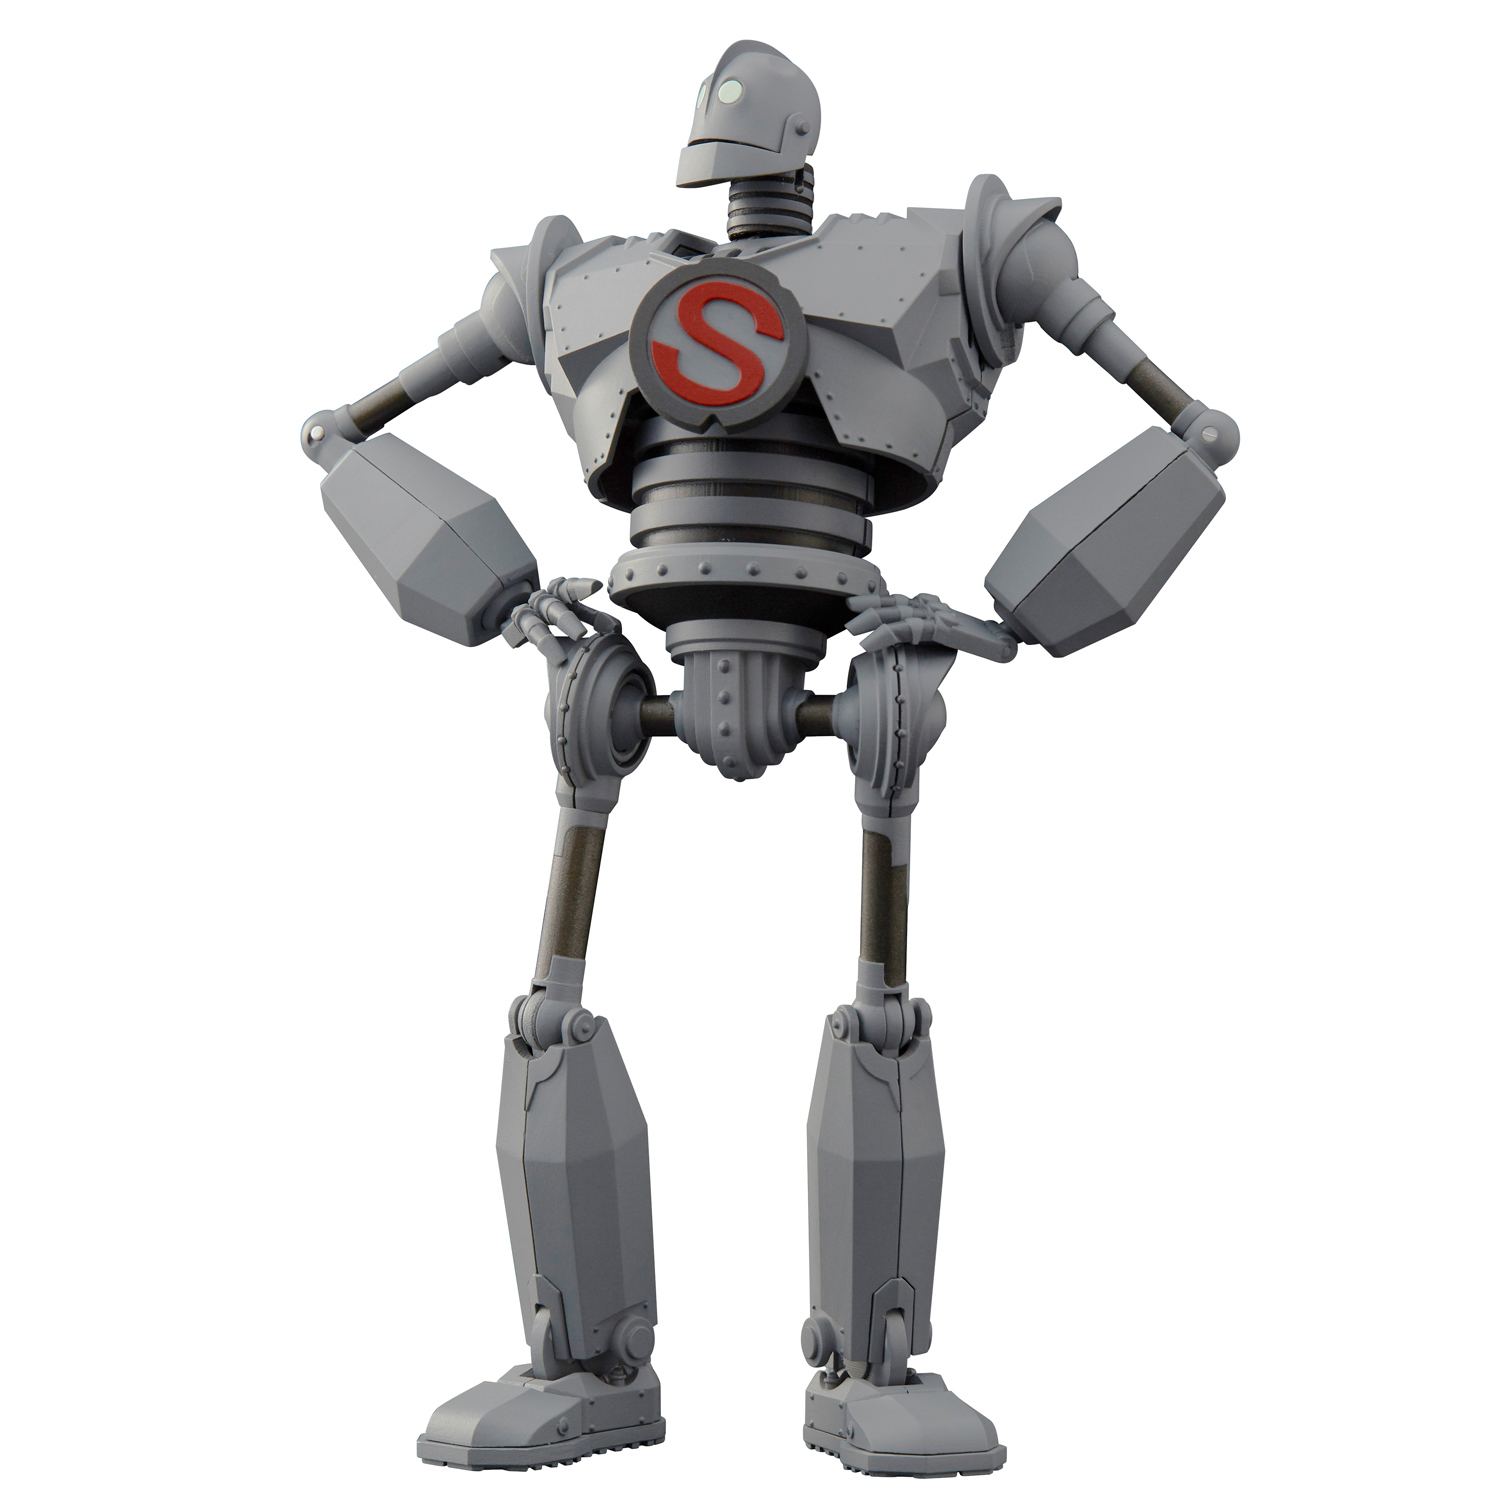 RIOBOT THE IRON GIANT 1/80 SCALE PRE-PAINTED FIGURE: THE IRON GIANT Sentinel